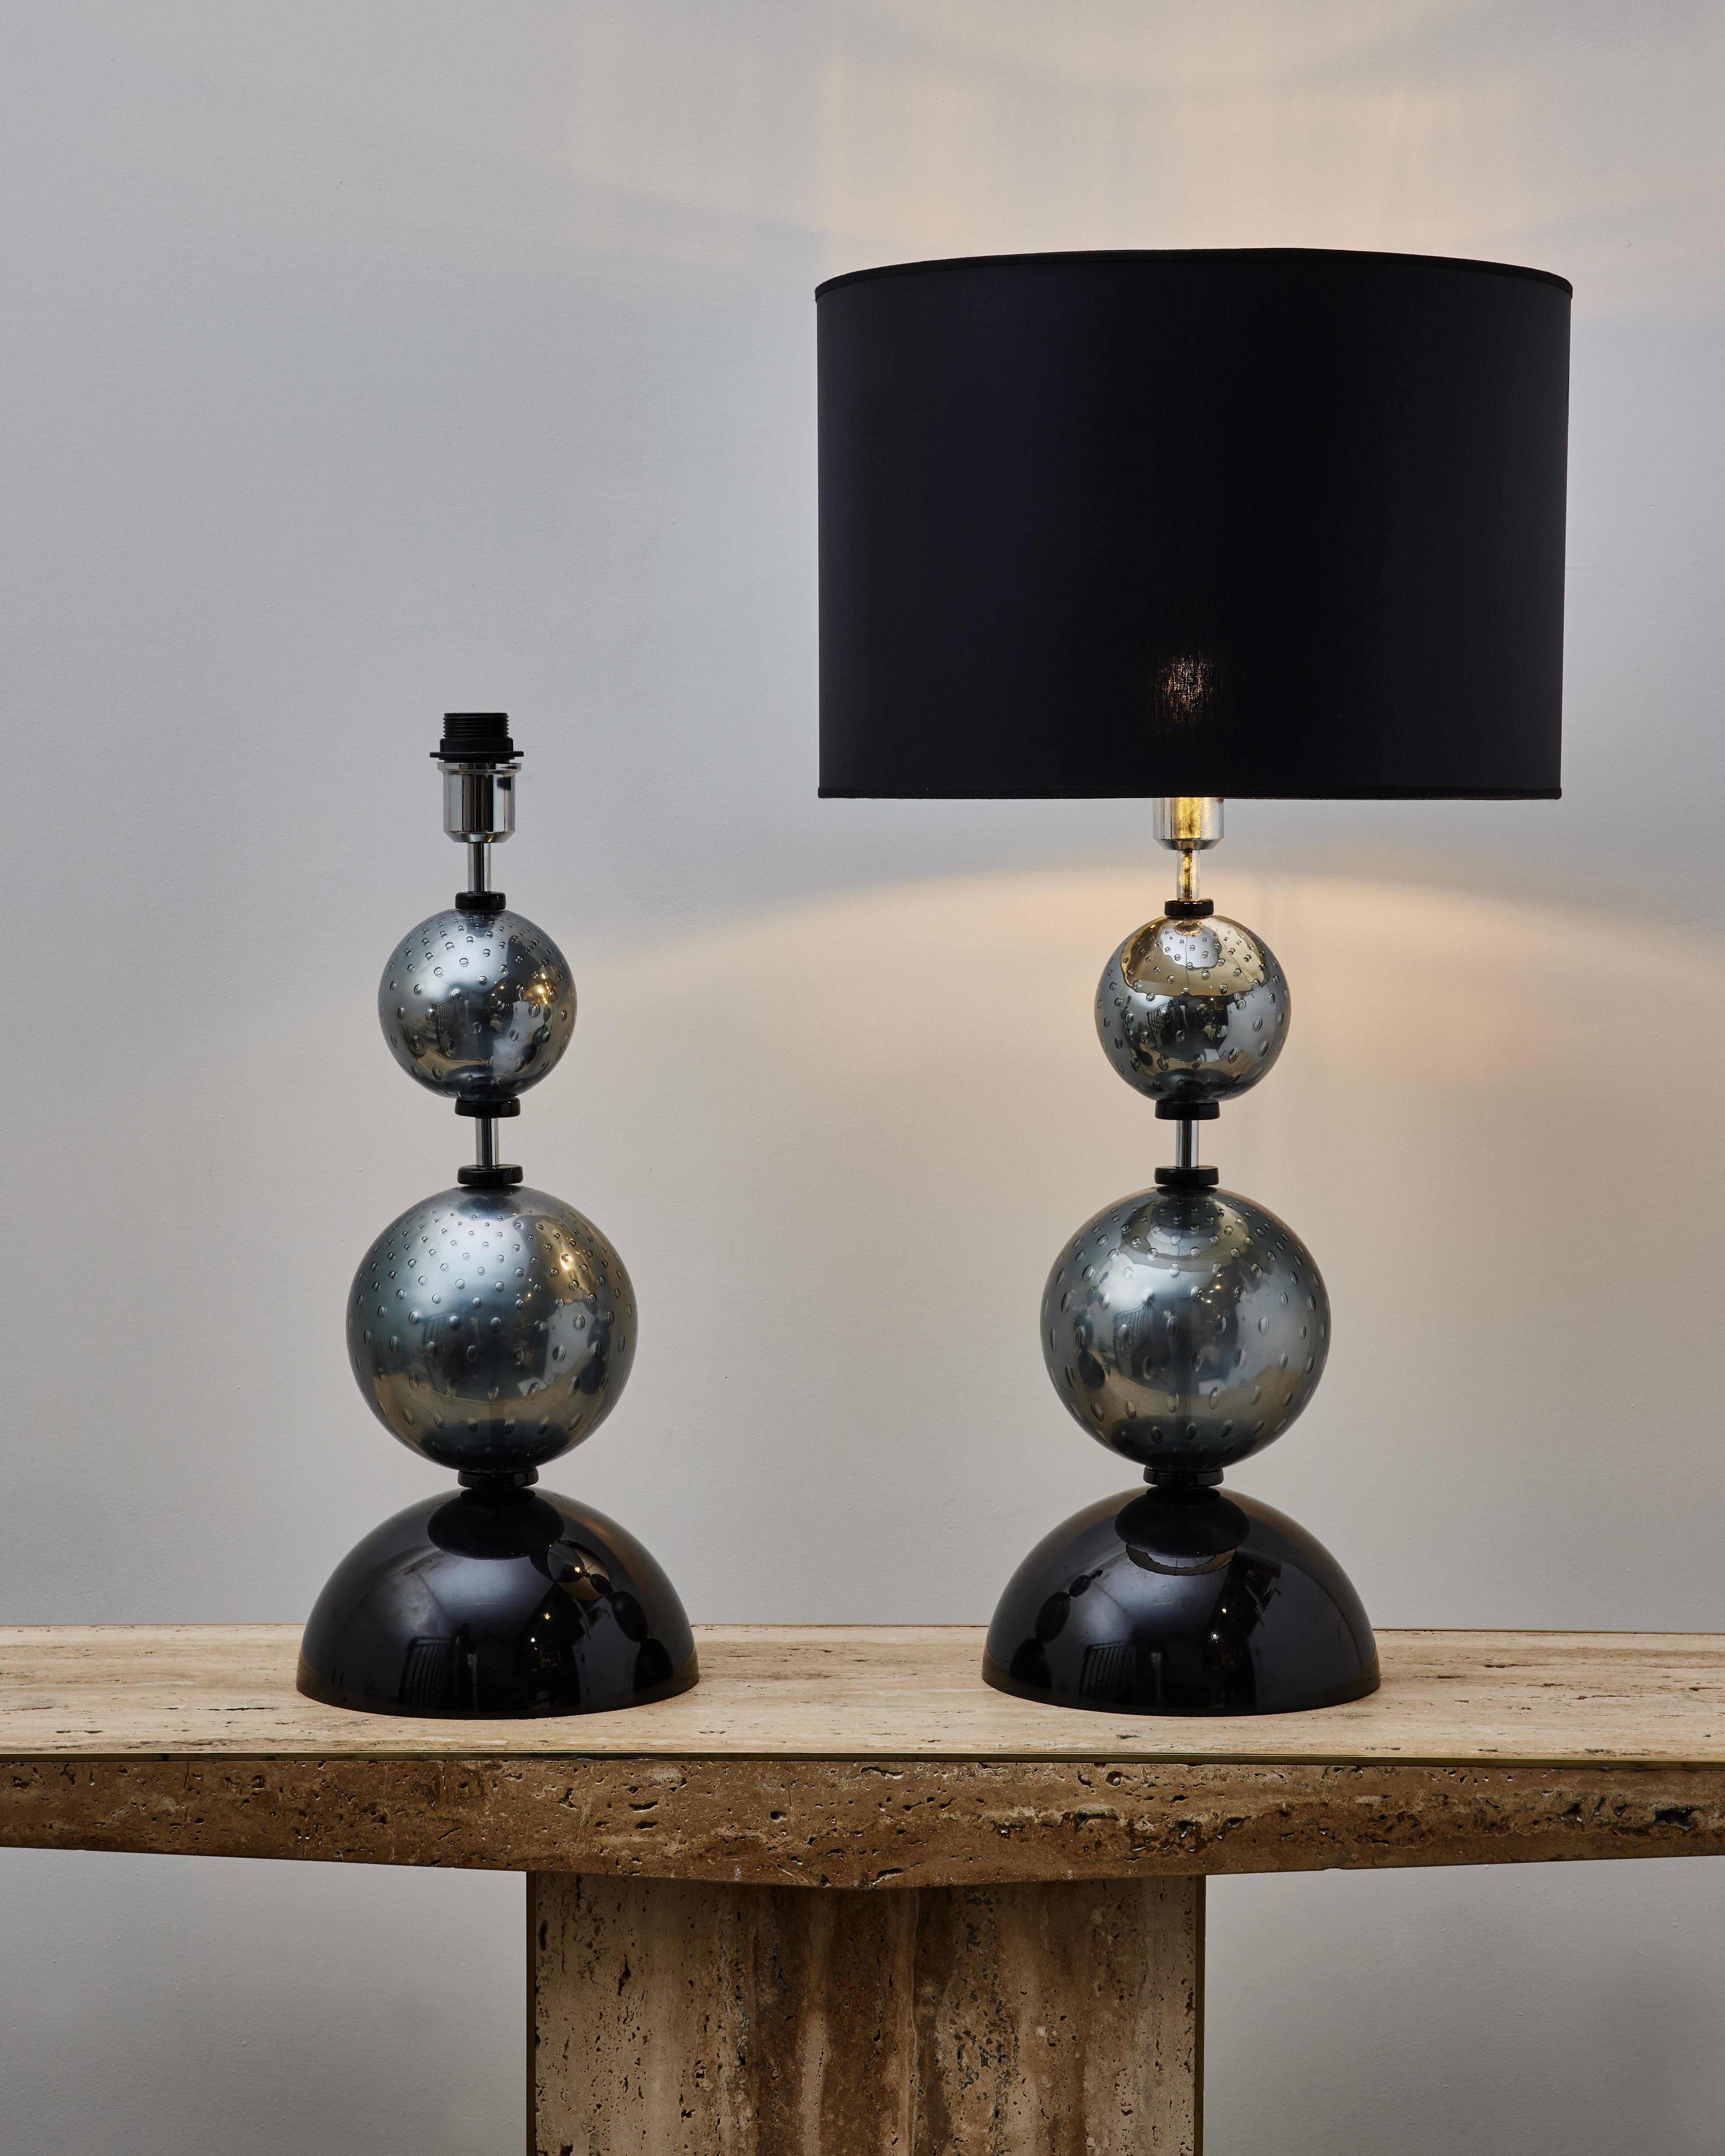 Super pair of vintage table lamps in sculpted and blown Murano glass.
Italy, 1990s.
Restored and rewired.

Dimensions and price without shade.